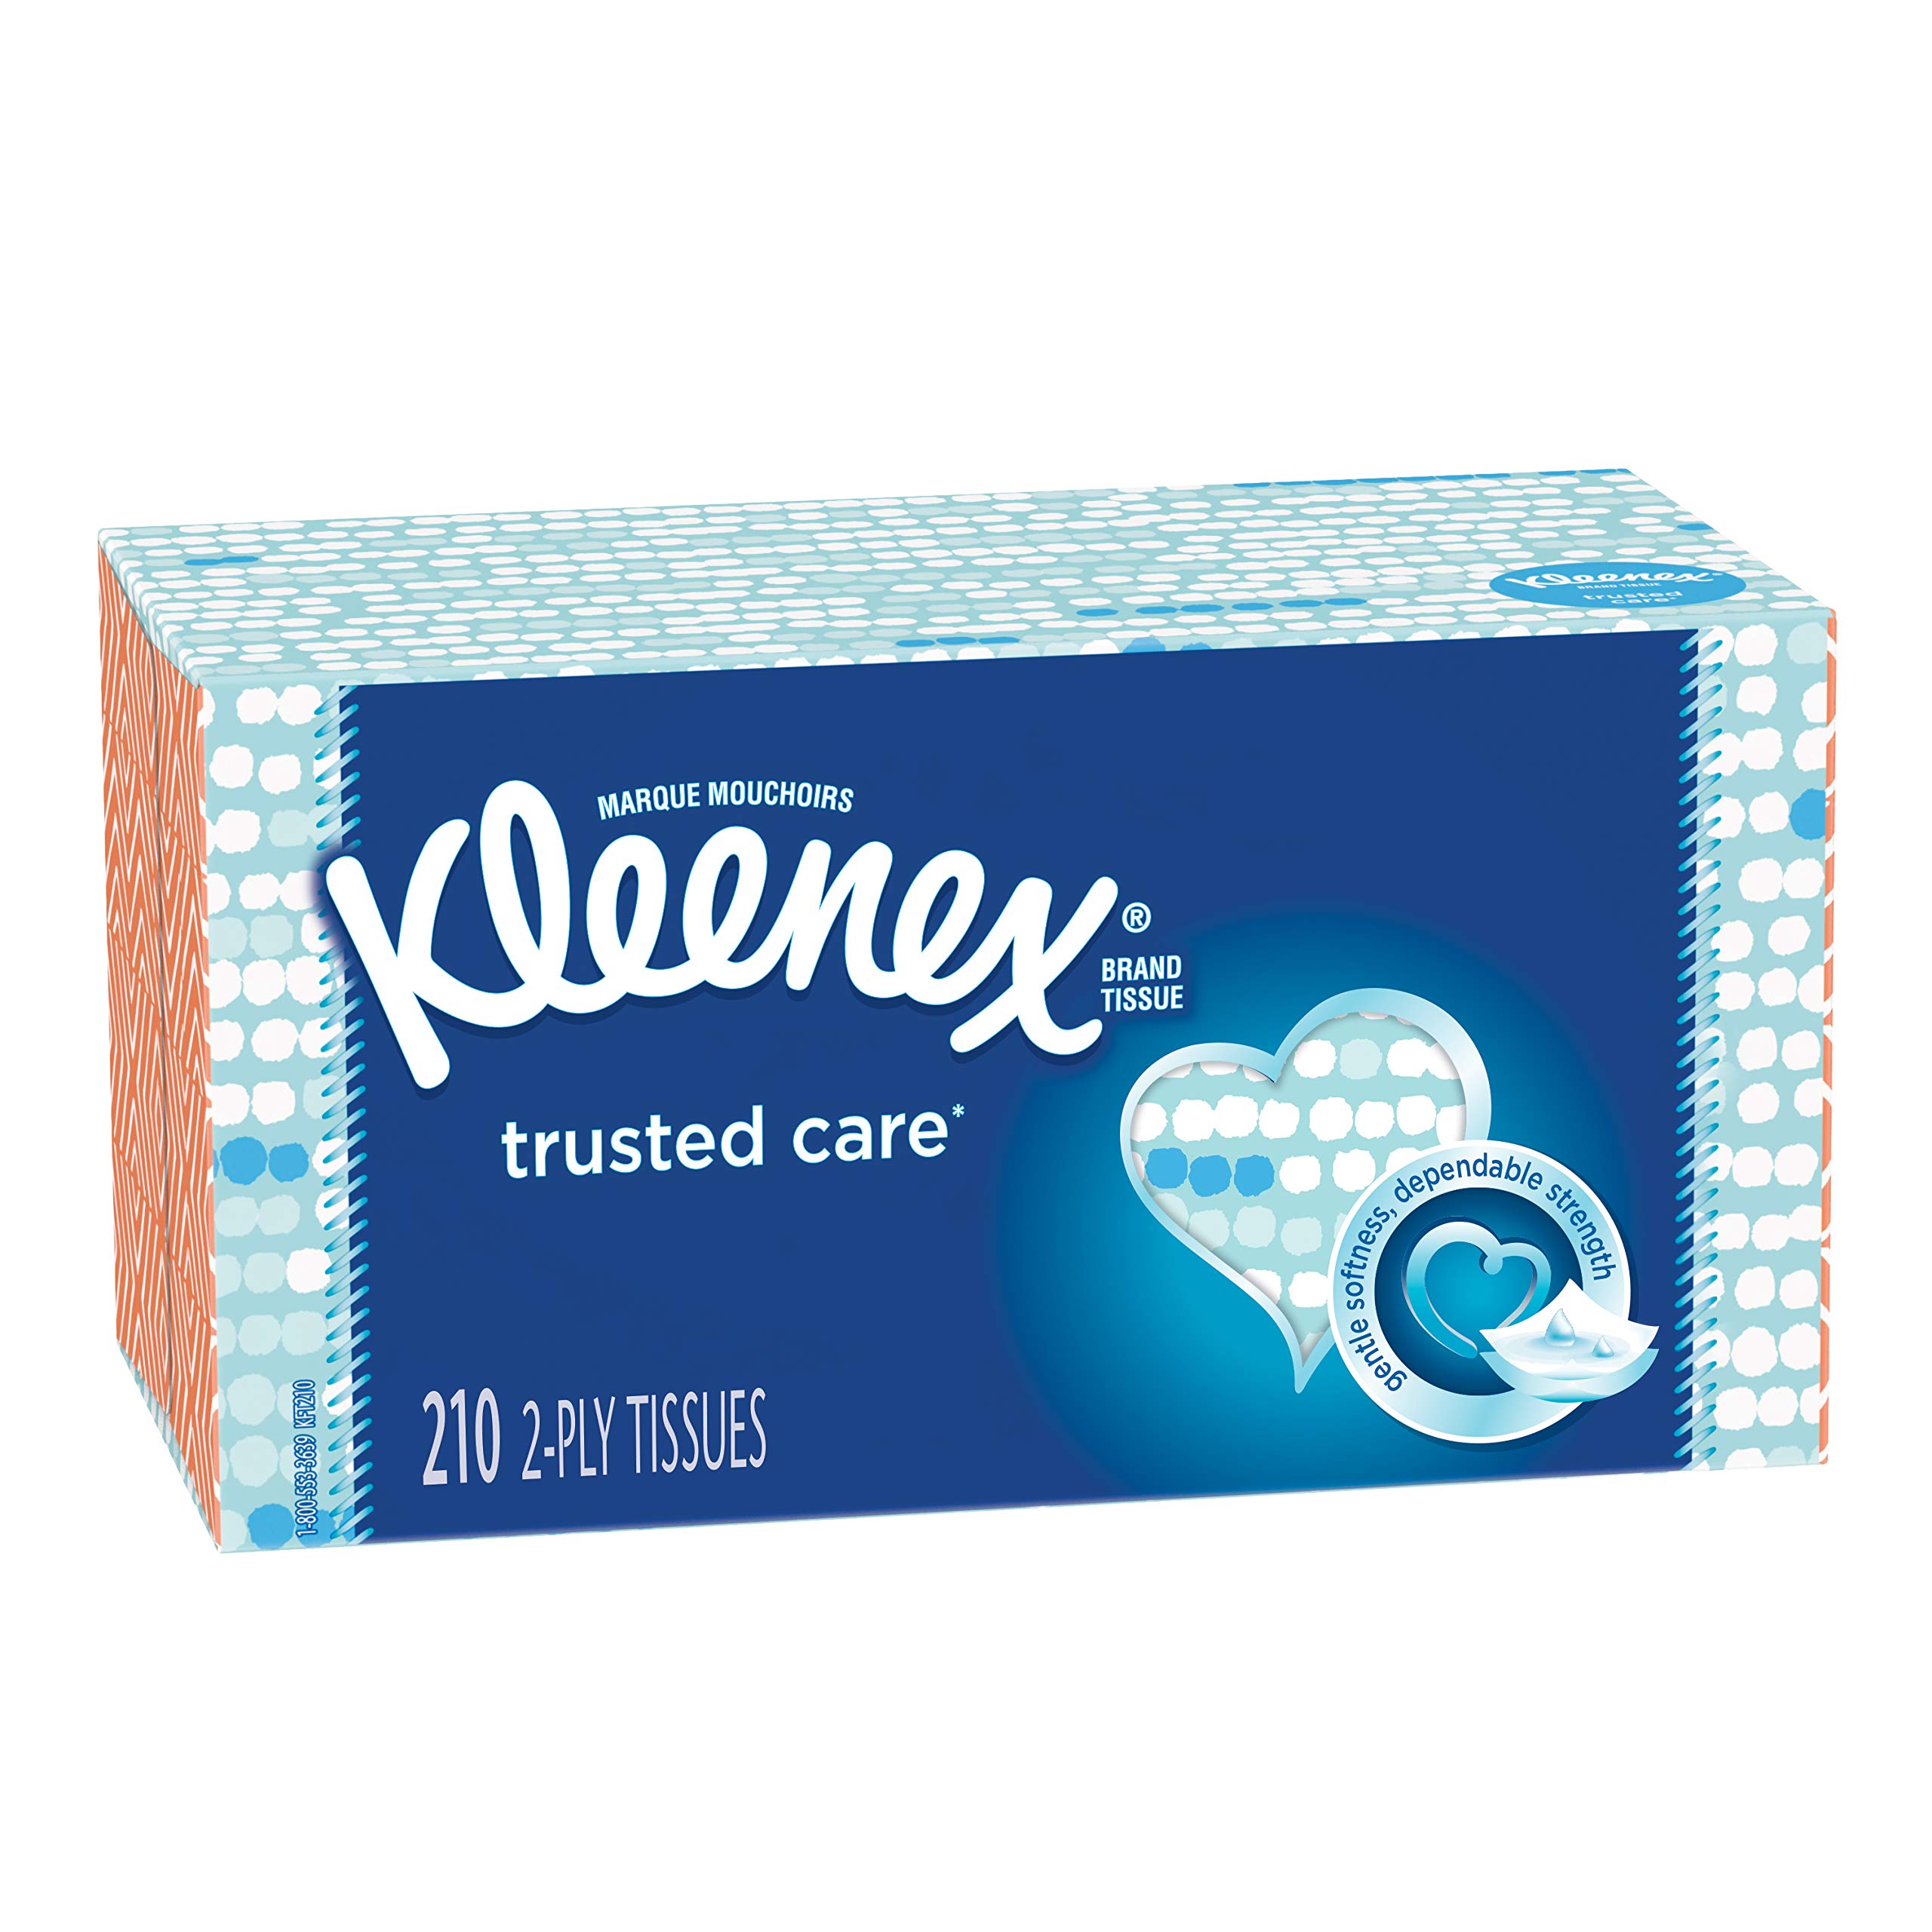 Kleenex Trusted Care Facial Tissues, 18 Flat Boxes, 210 Tissues per Box (3,780 Tissues Total)